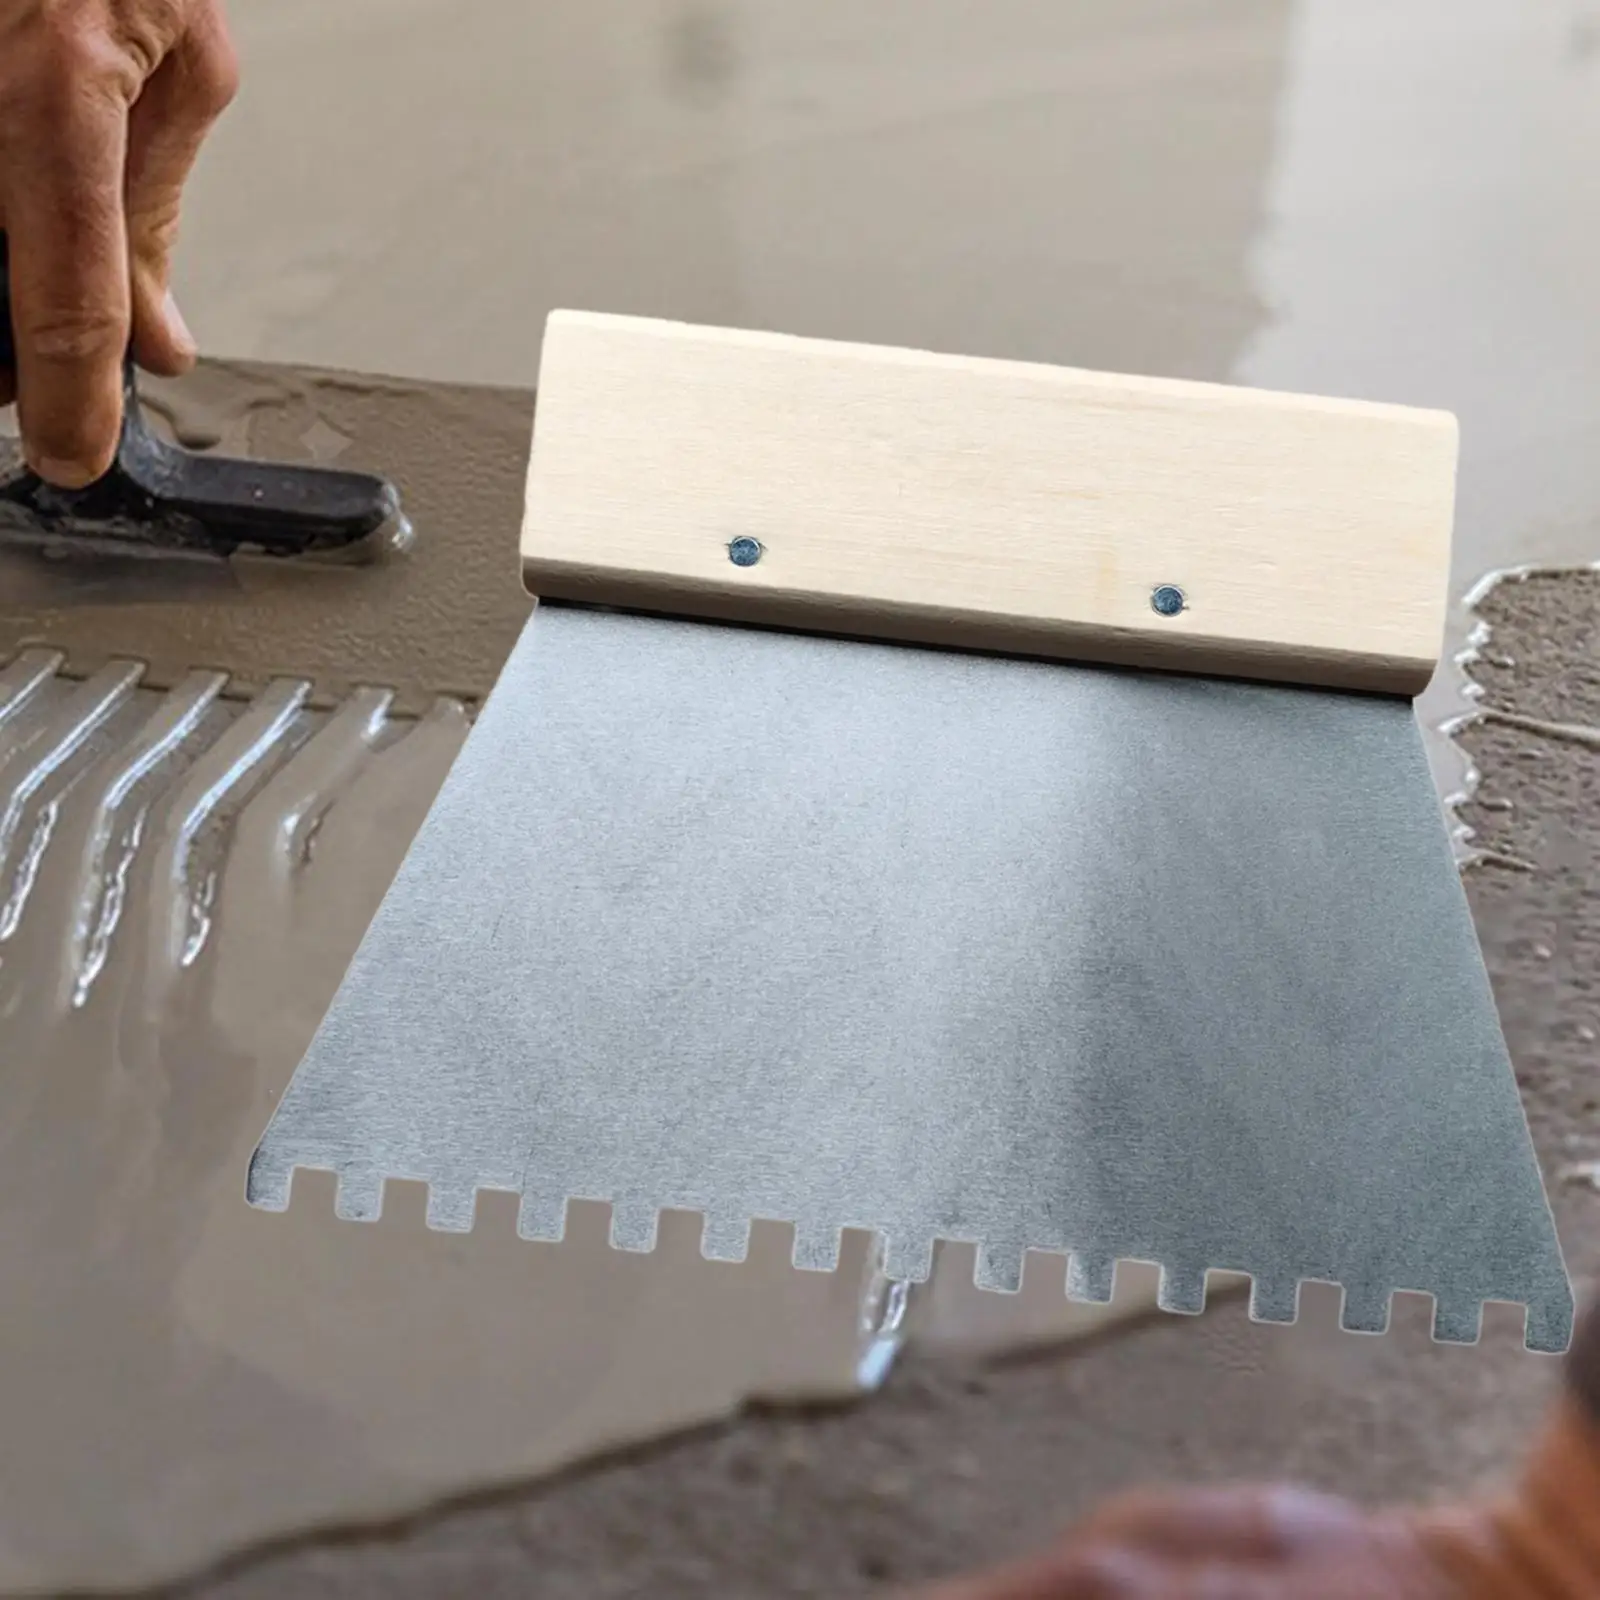 

Tile Trowel Plaster Tiling Notched Trowel Wall Comb Trowel Putty Grout Spreading Tools Tile Flooring Trowel Plastering Trowel